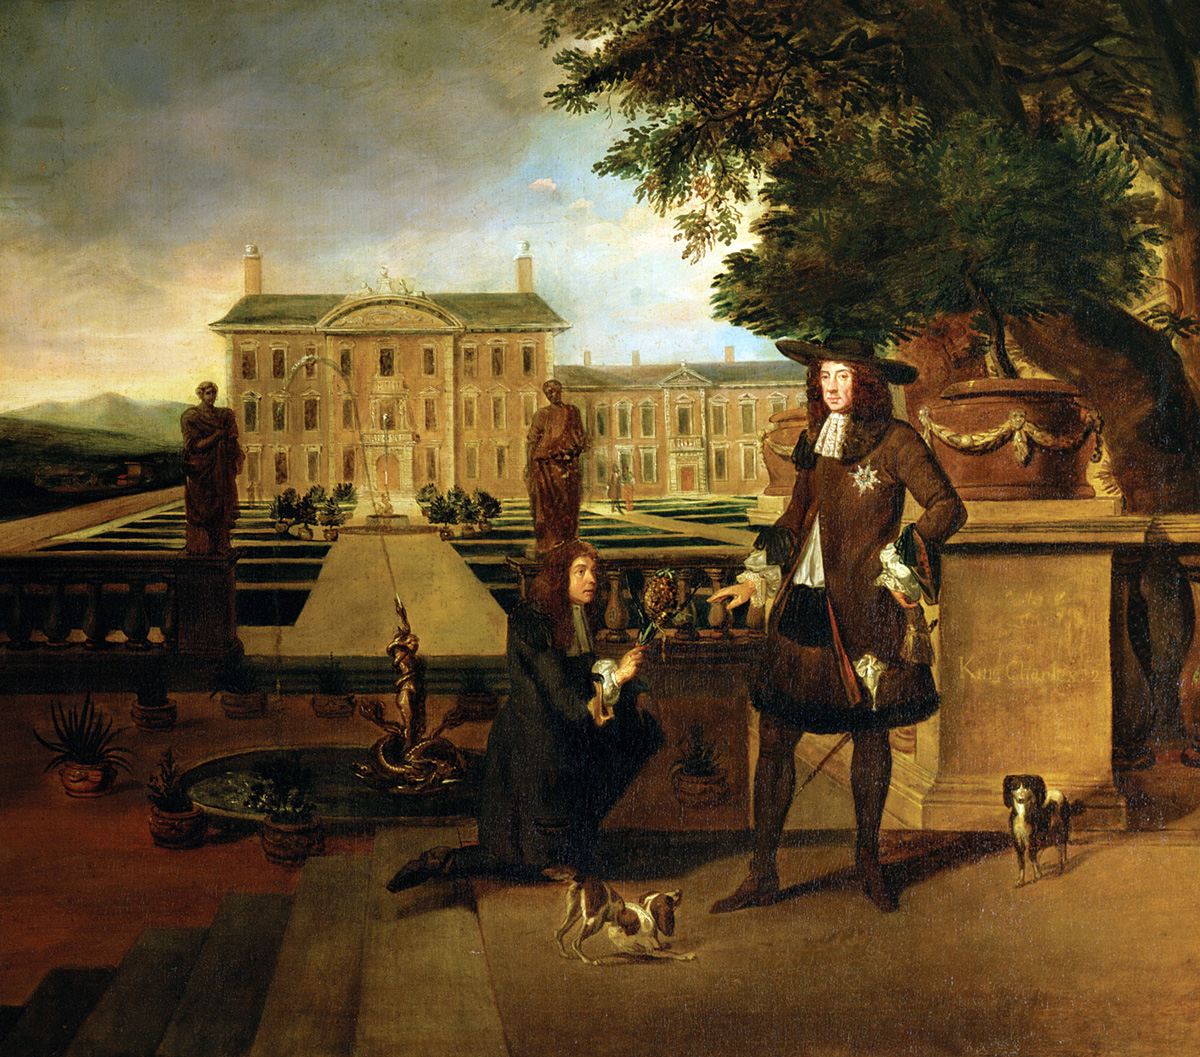 A painting attributed to Hendrick Danckerts titled 